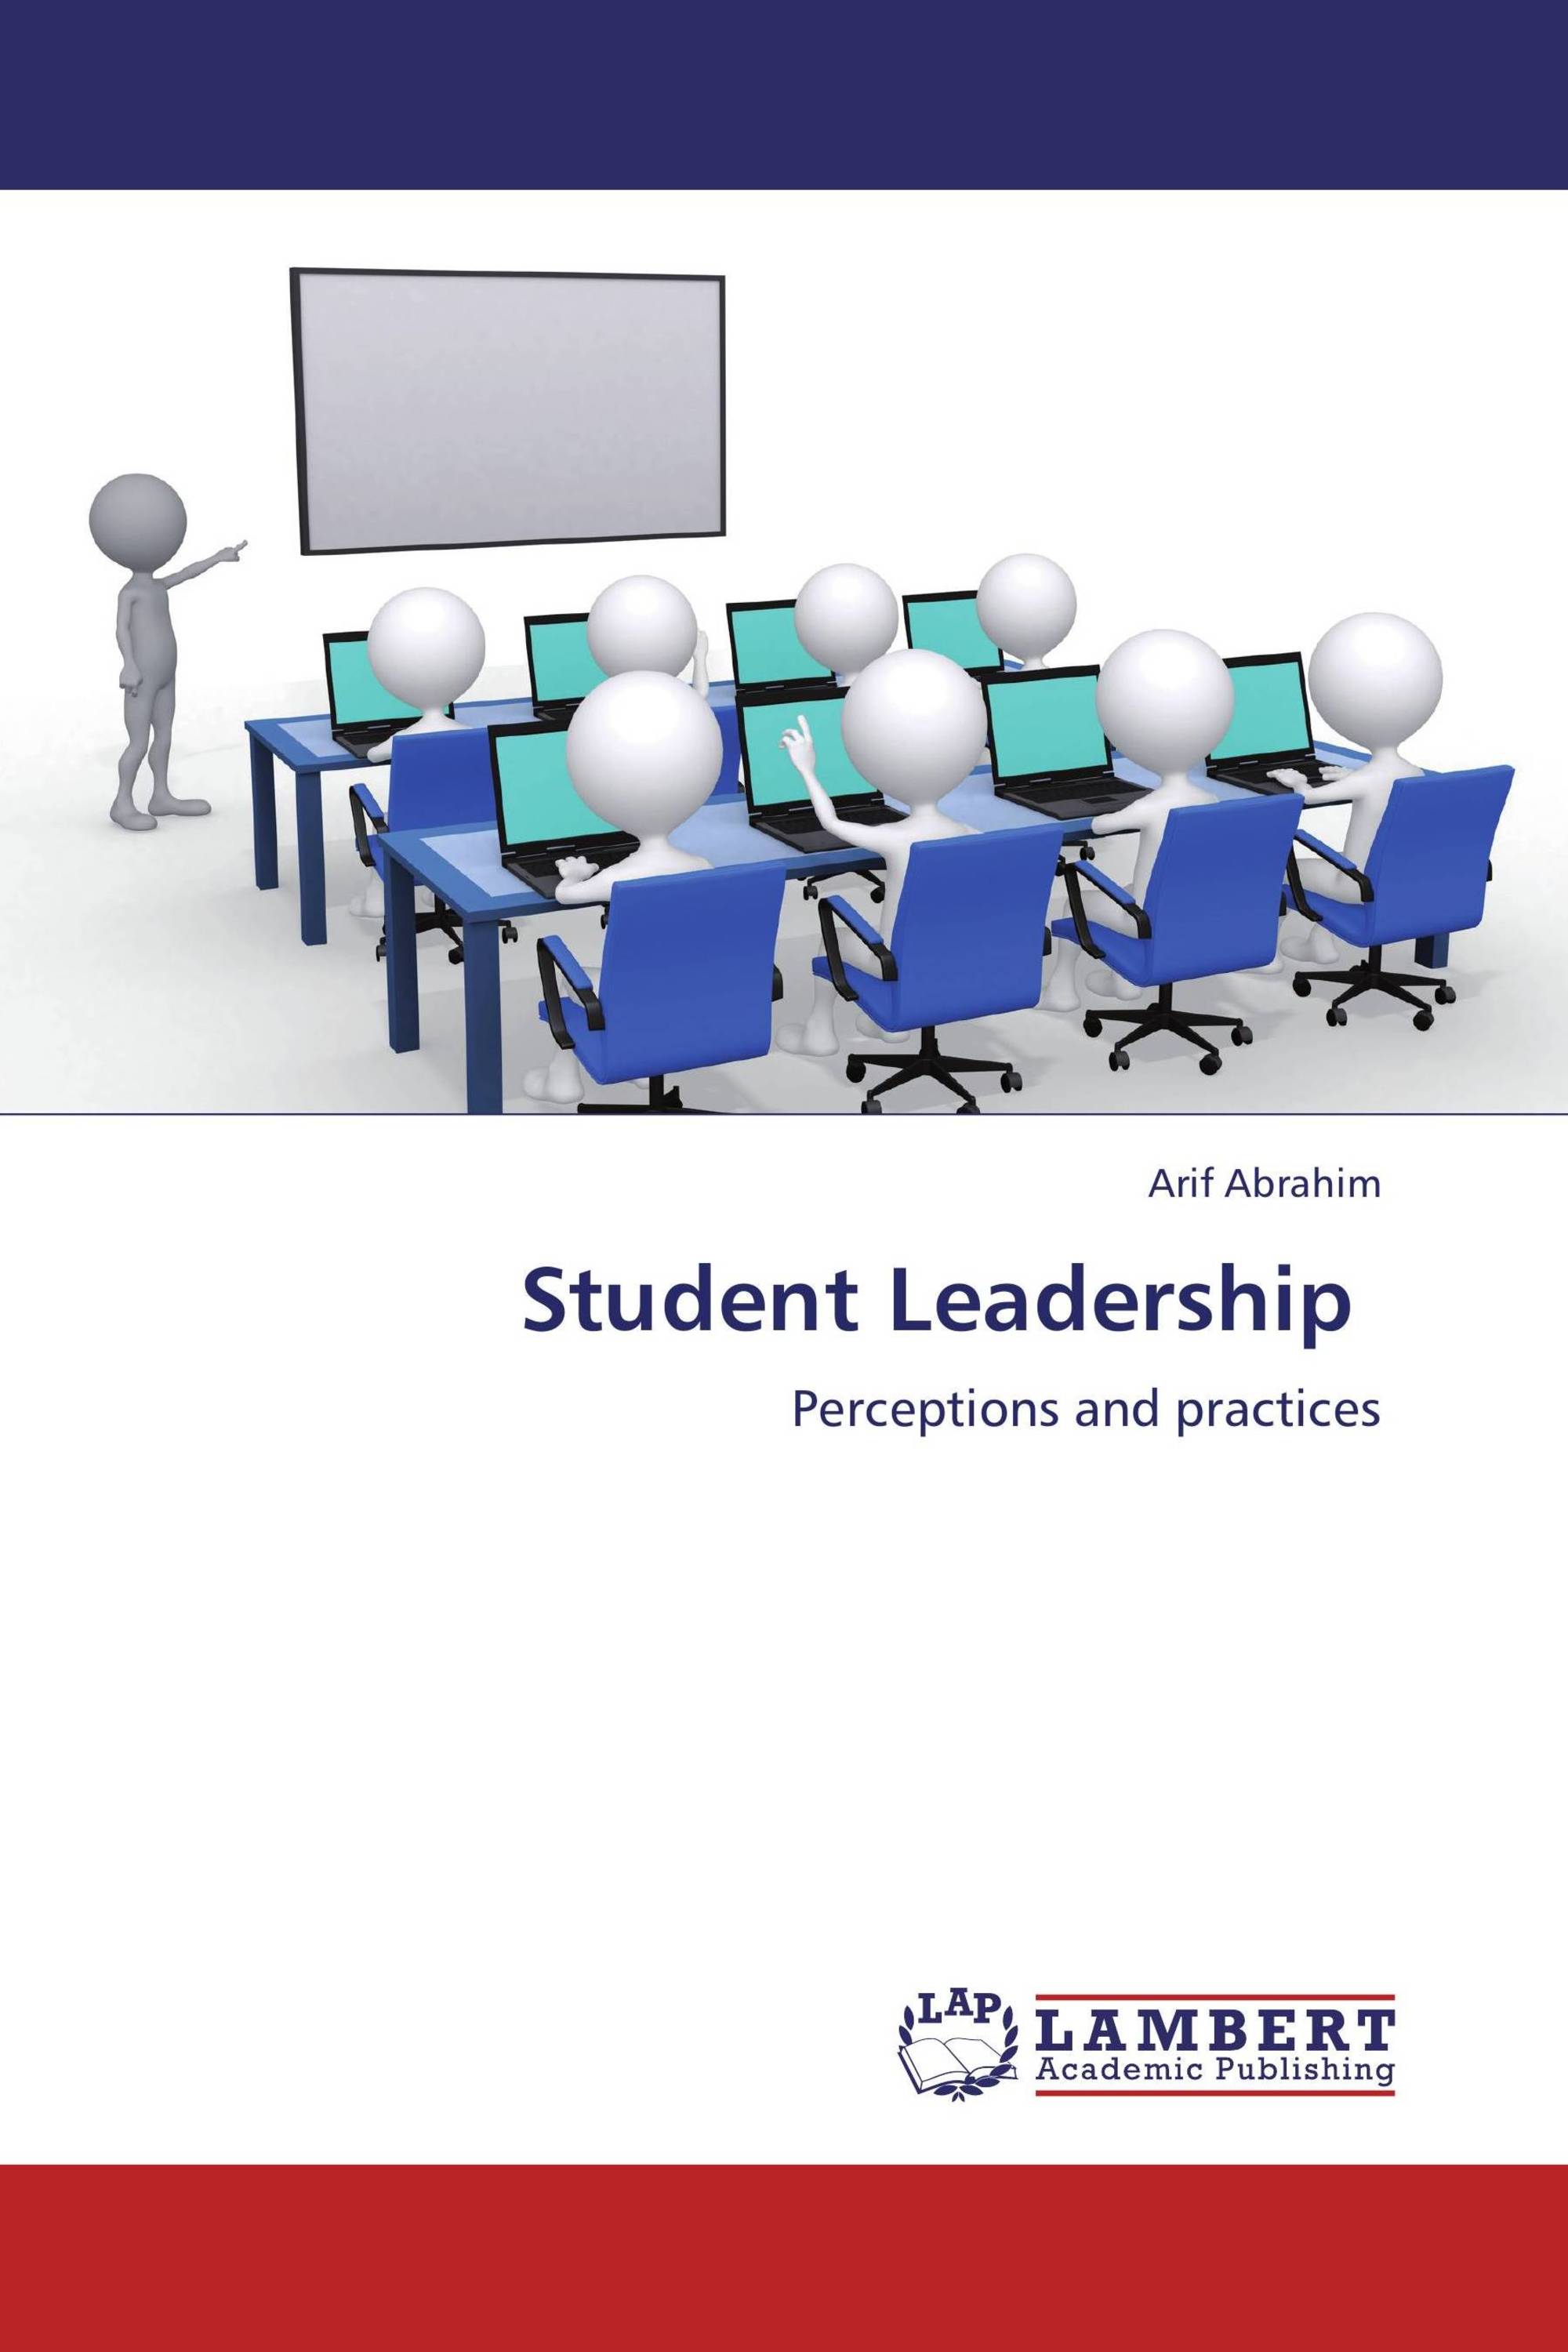 research about student leadership